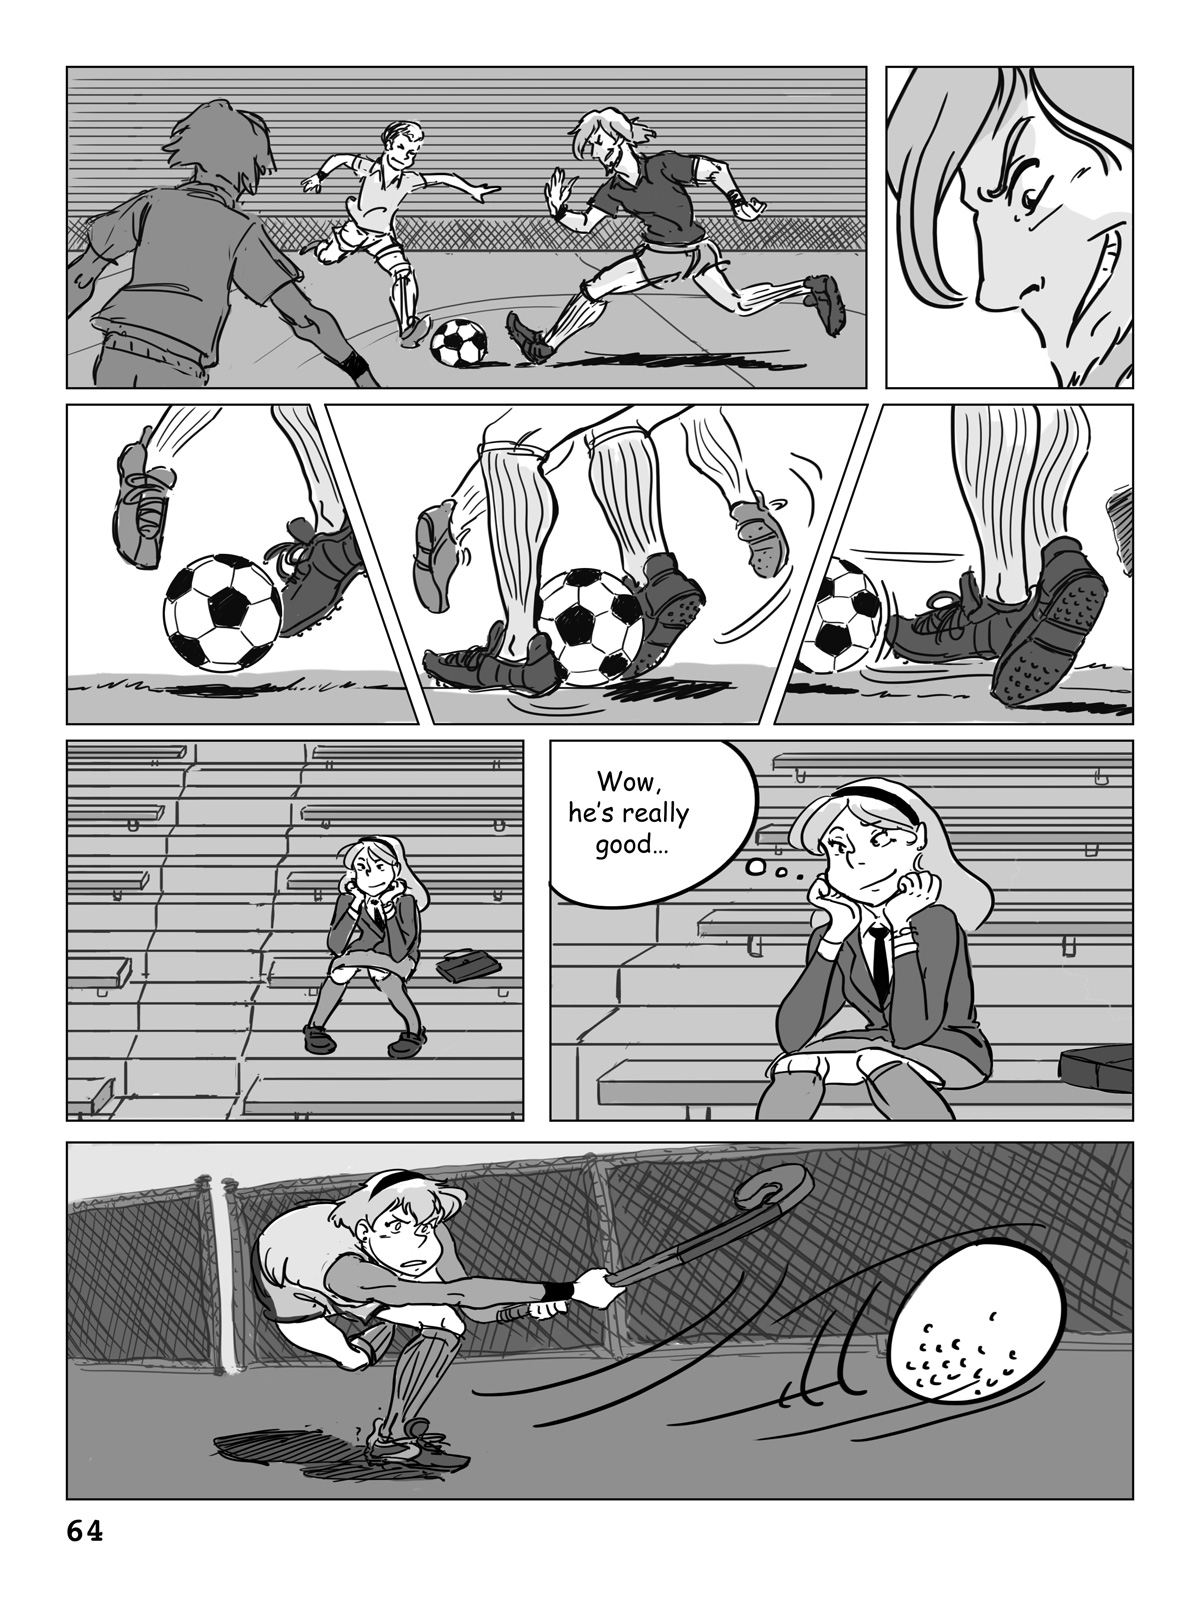 Hockey, Love, & GUTS! – Chapter 4 – Page 64